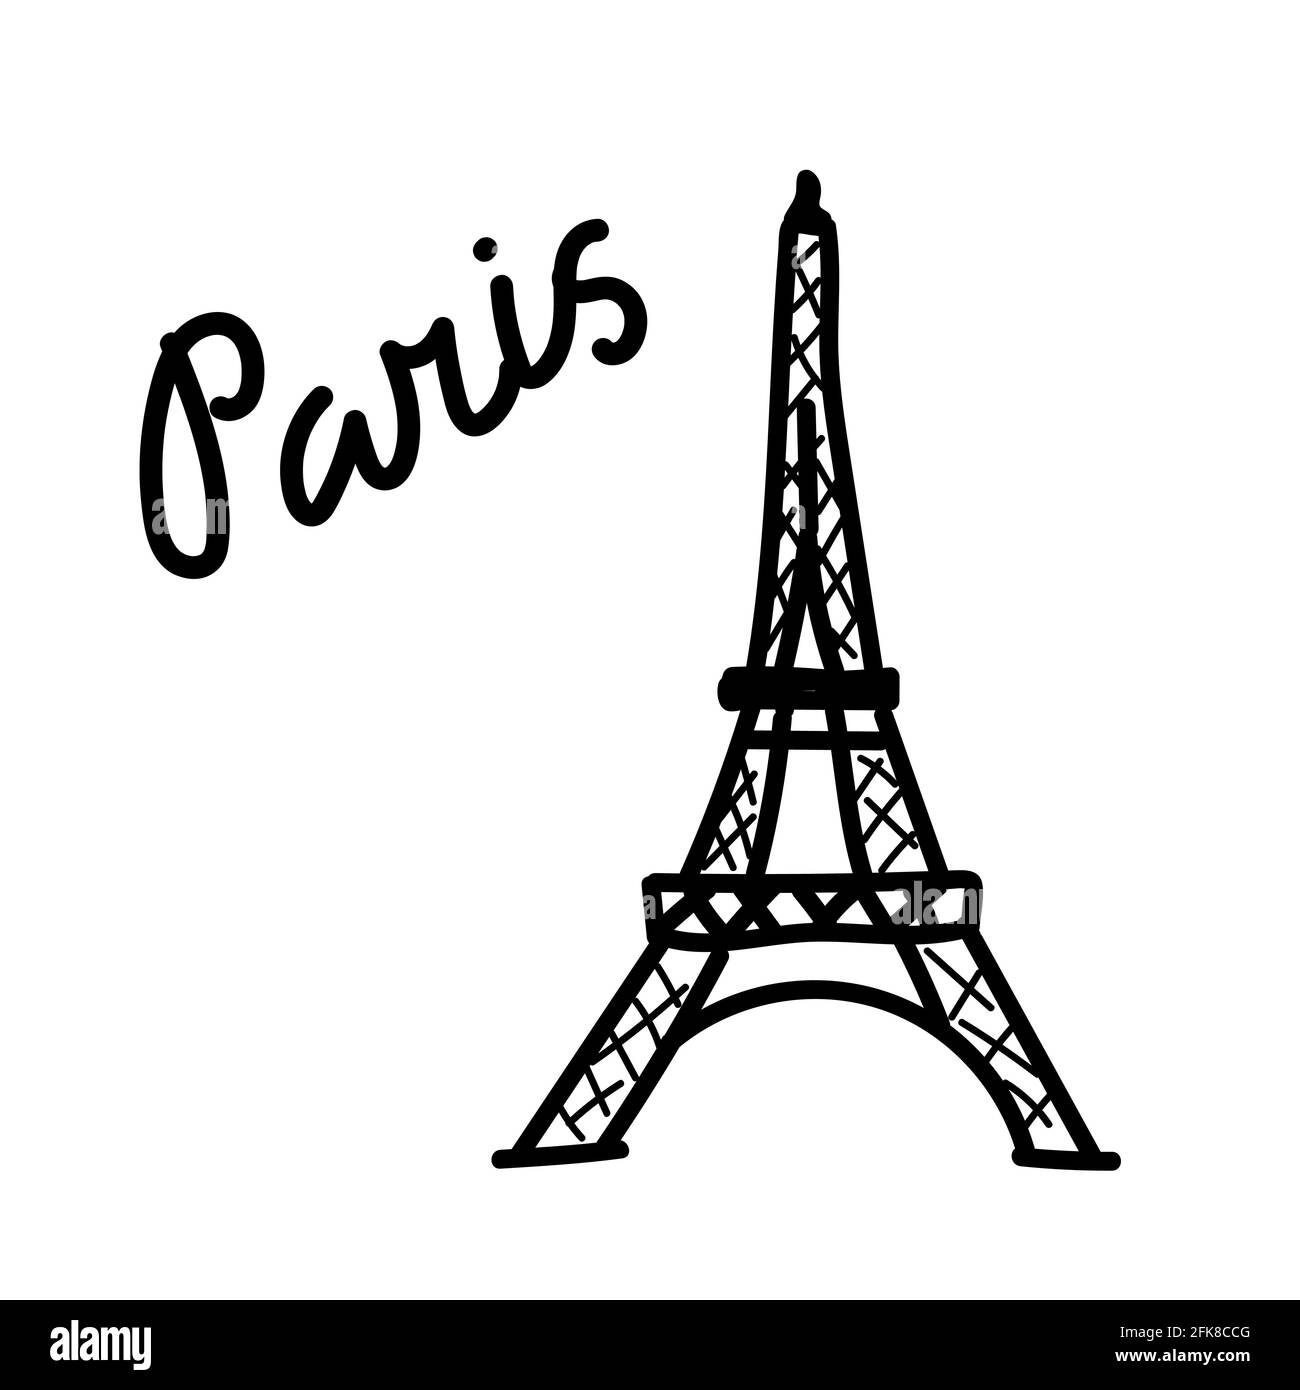 Eifel tower. Hand drawn doodle vector illustration isolated on whithe background. Simple drawings with black color. Stock Vector